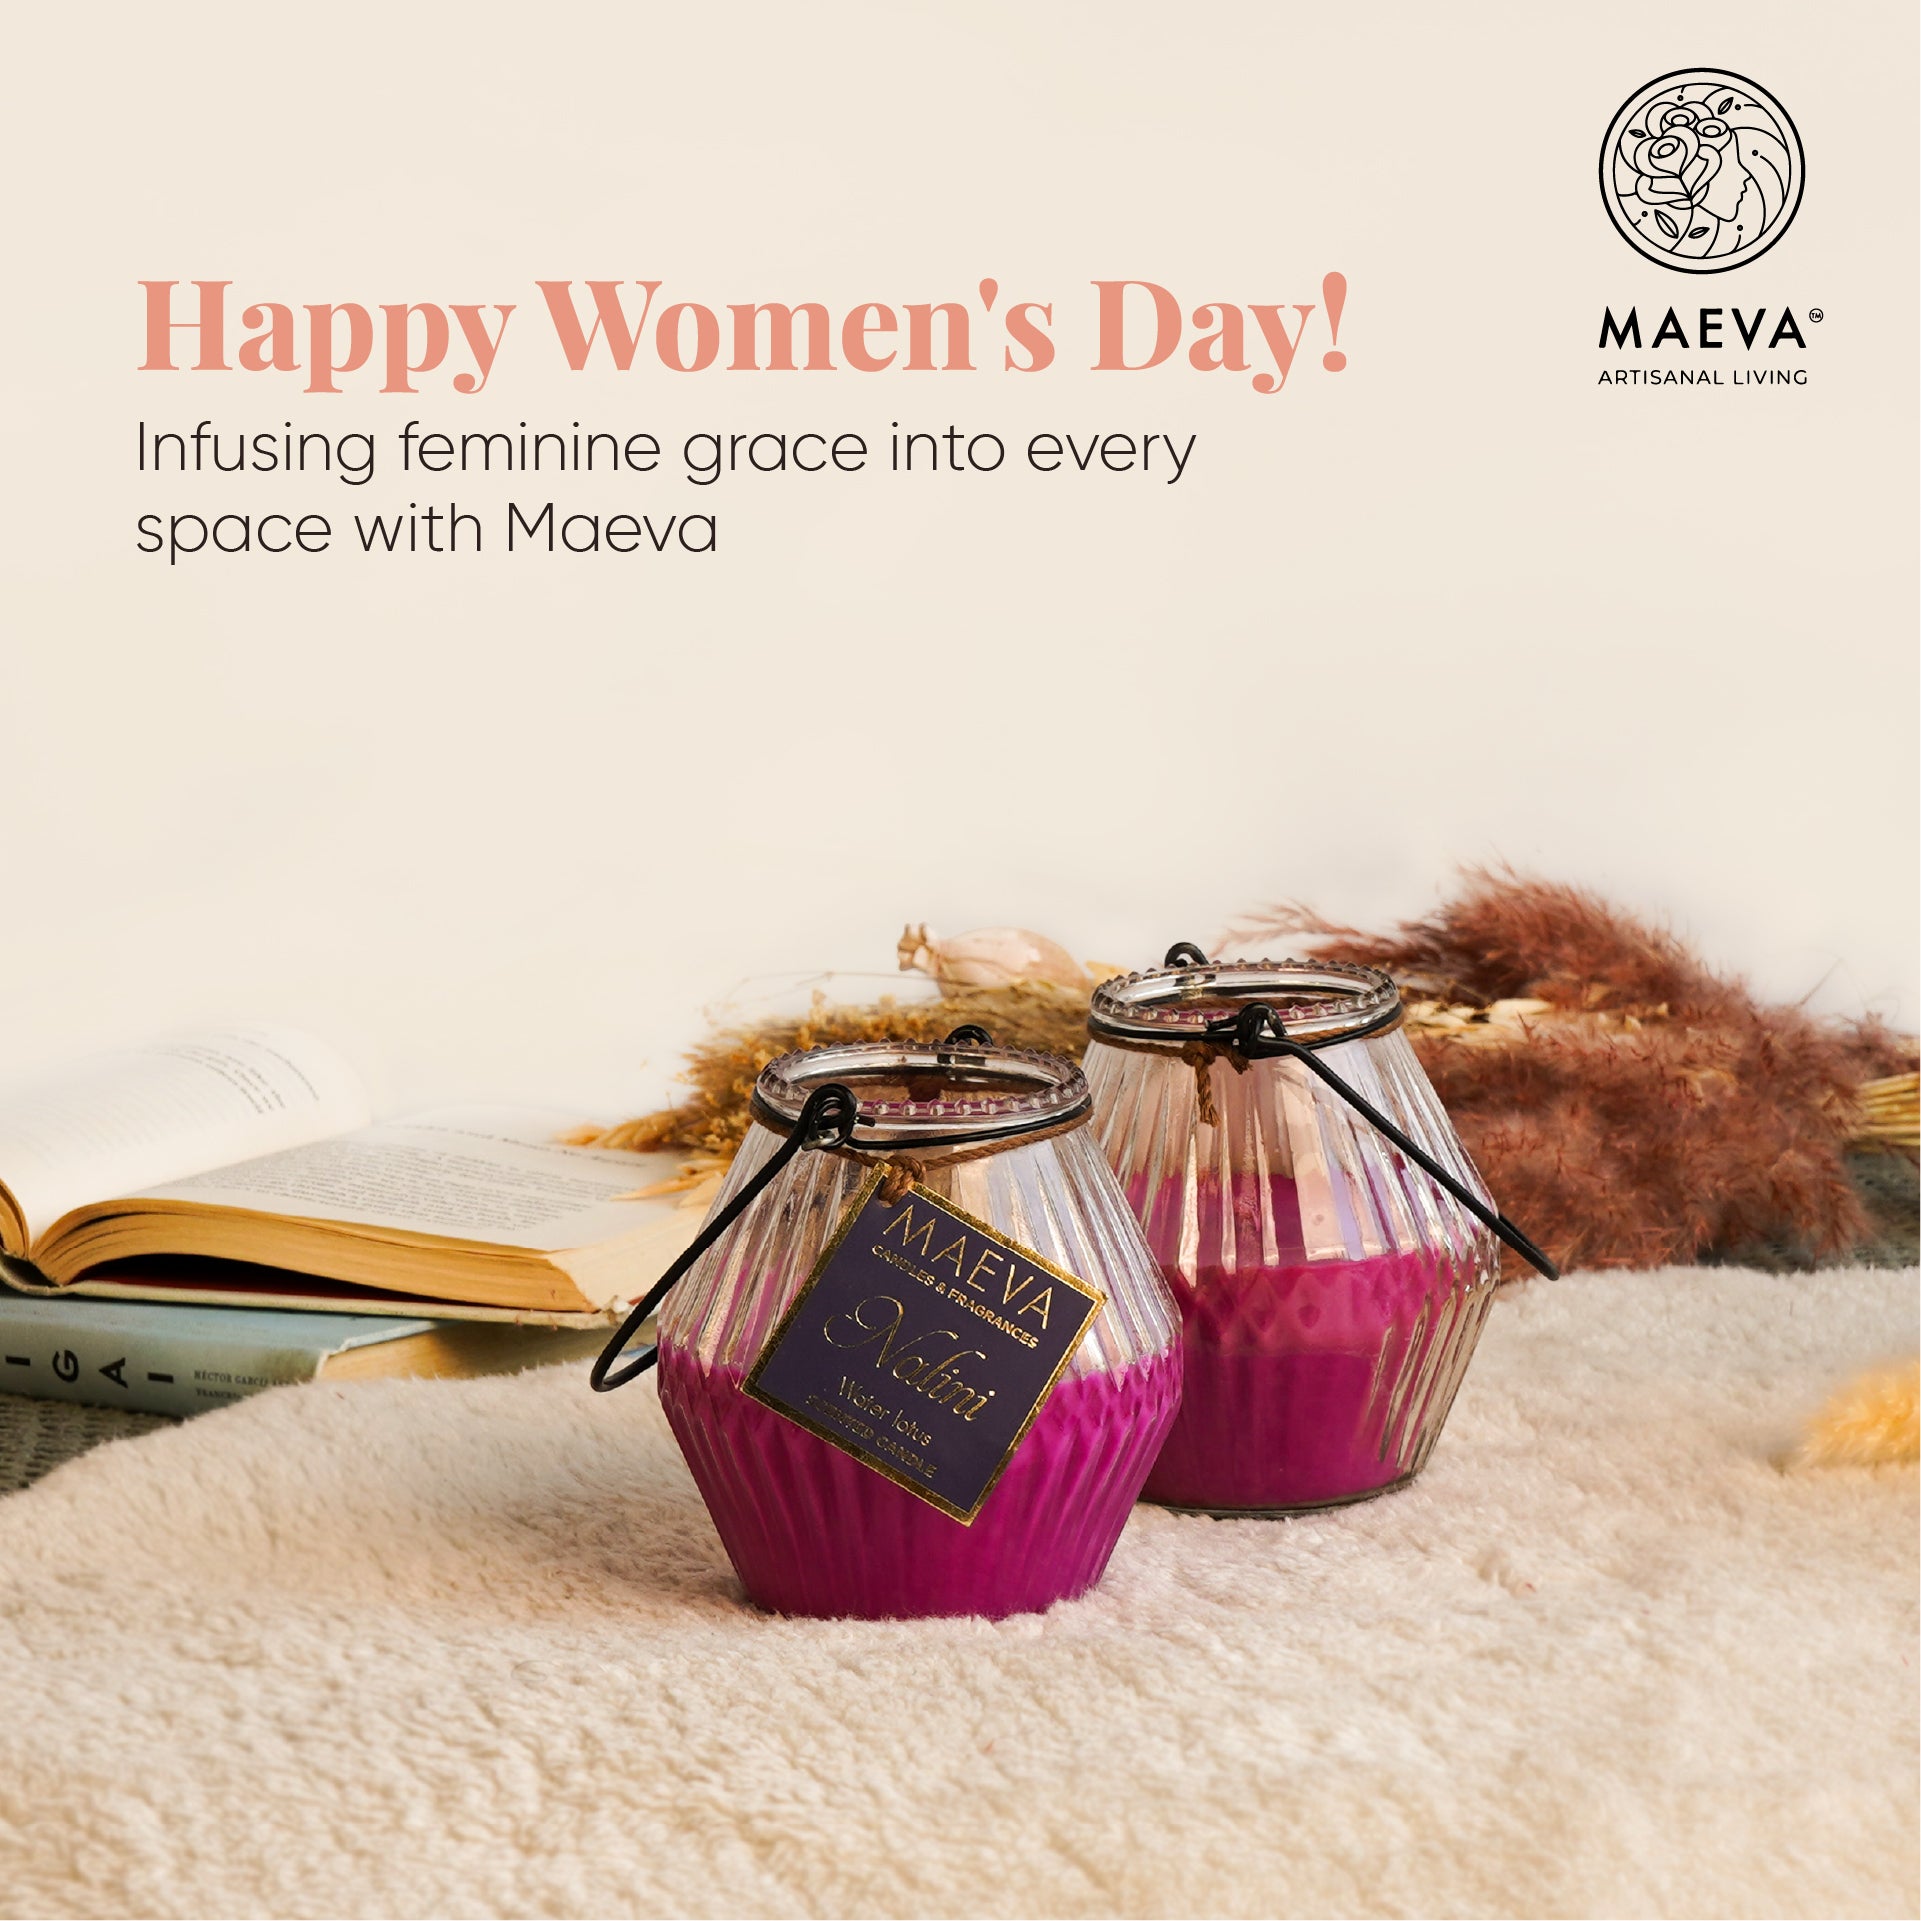 You're a Rockstar, Lady! Time to Celebrate You this Women's Day with Maeva